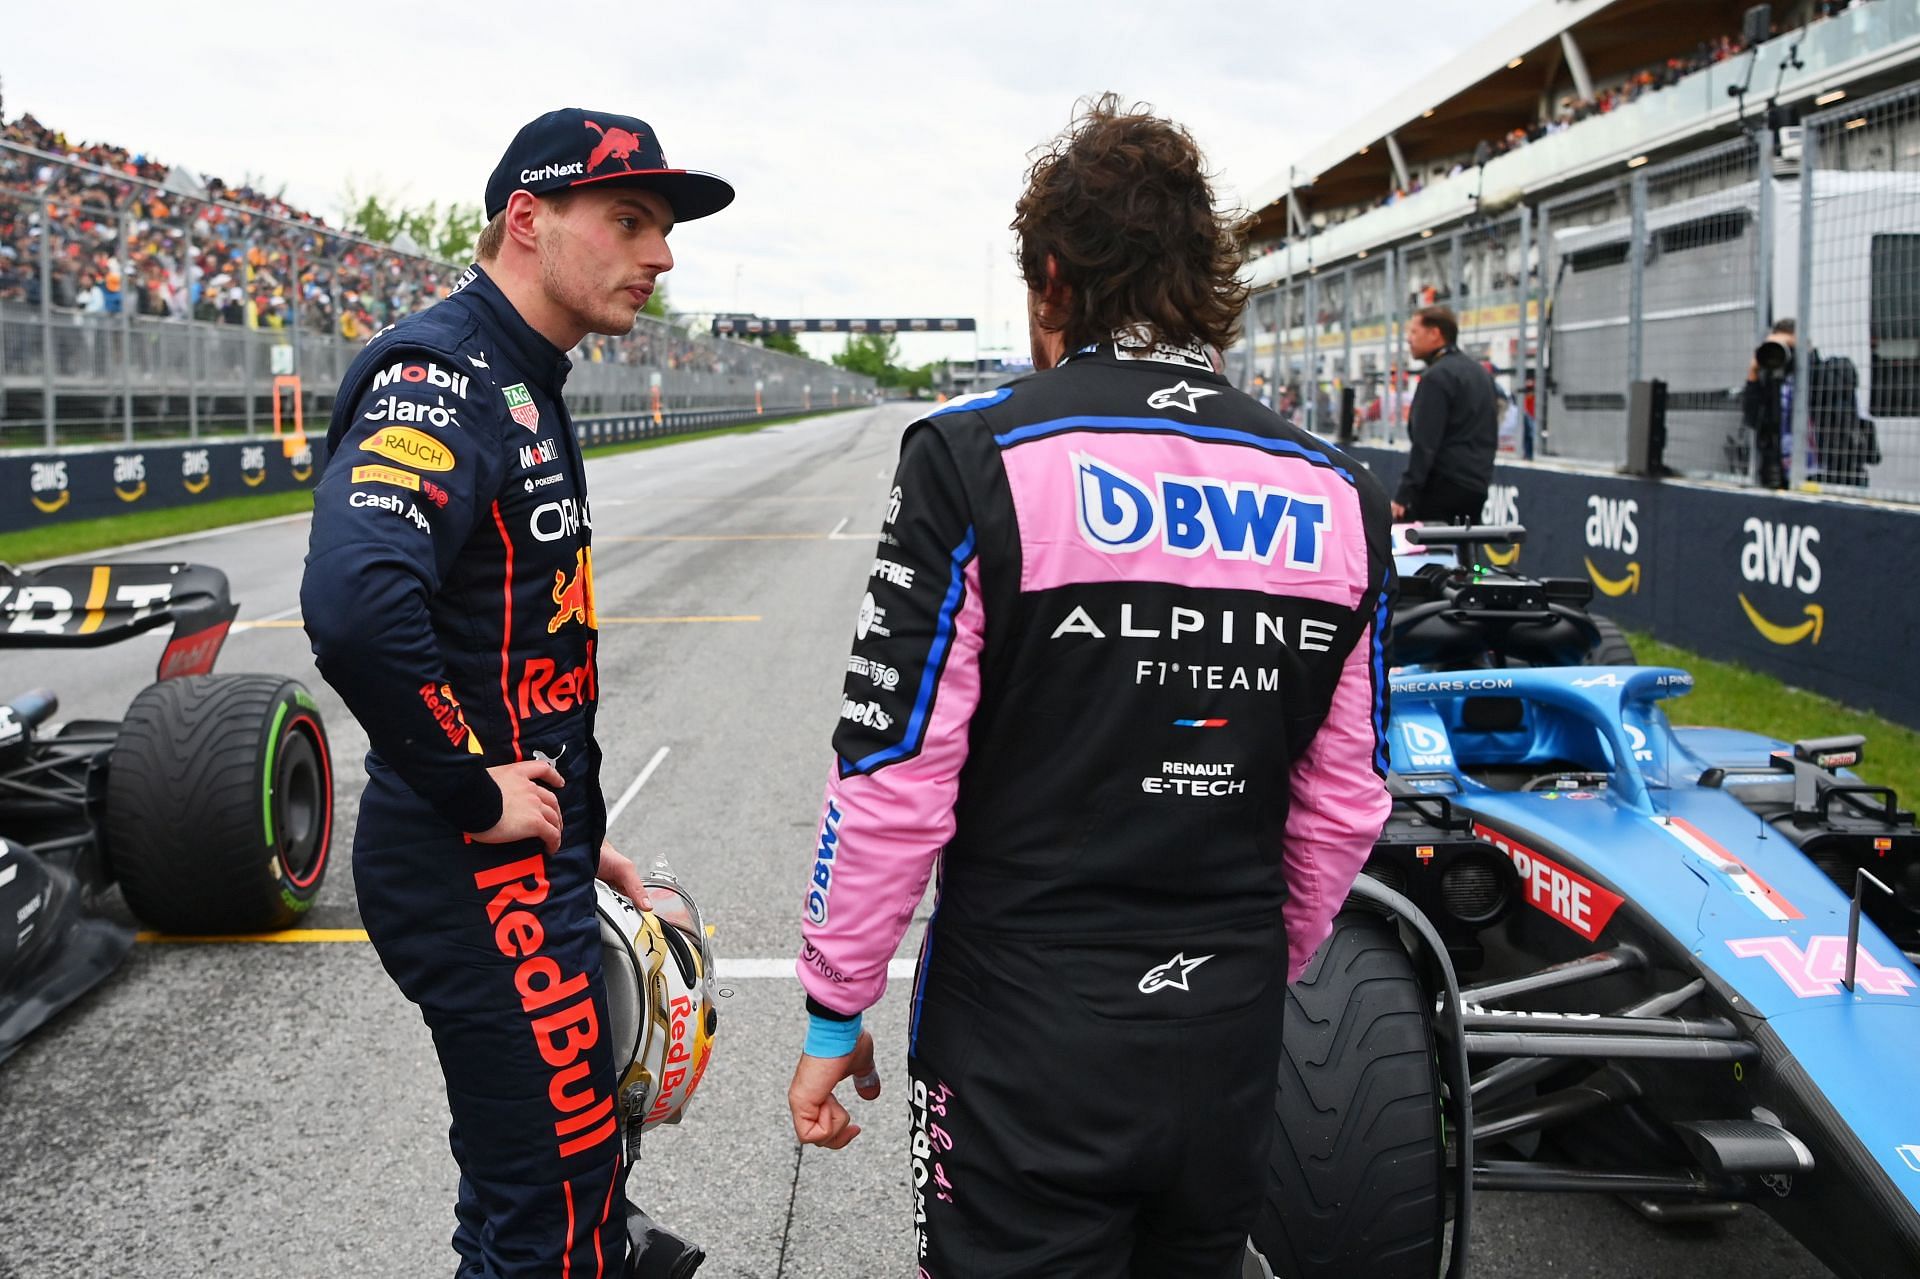 Max Verstappen (left) will be starting alongside Fernando Alonso (right) on the front row for the 2022 F1 Canadian GP